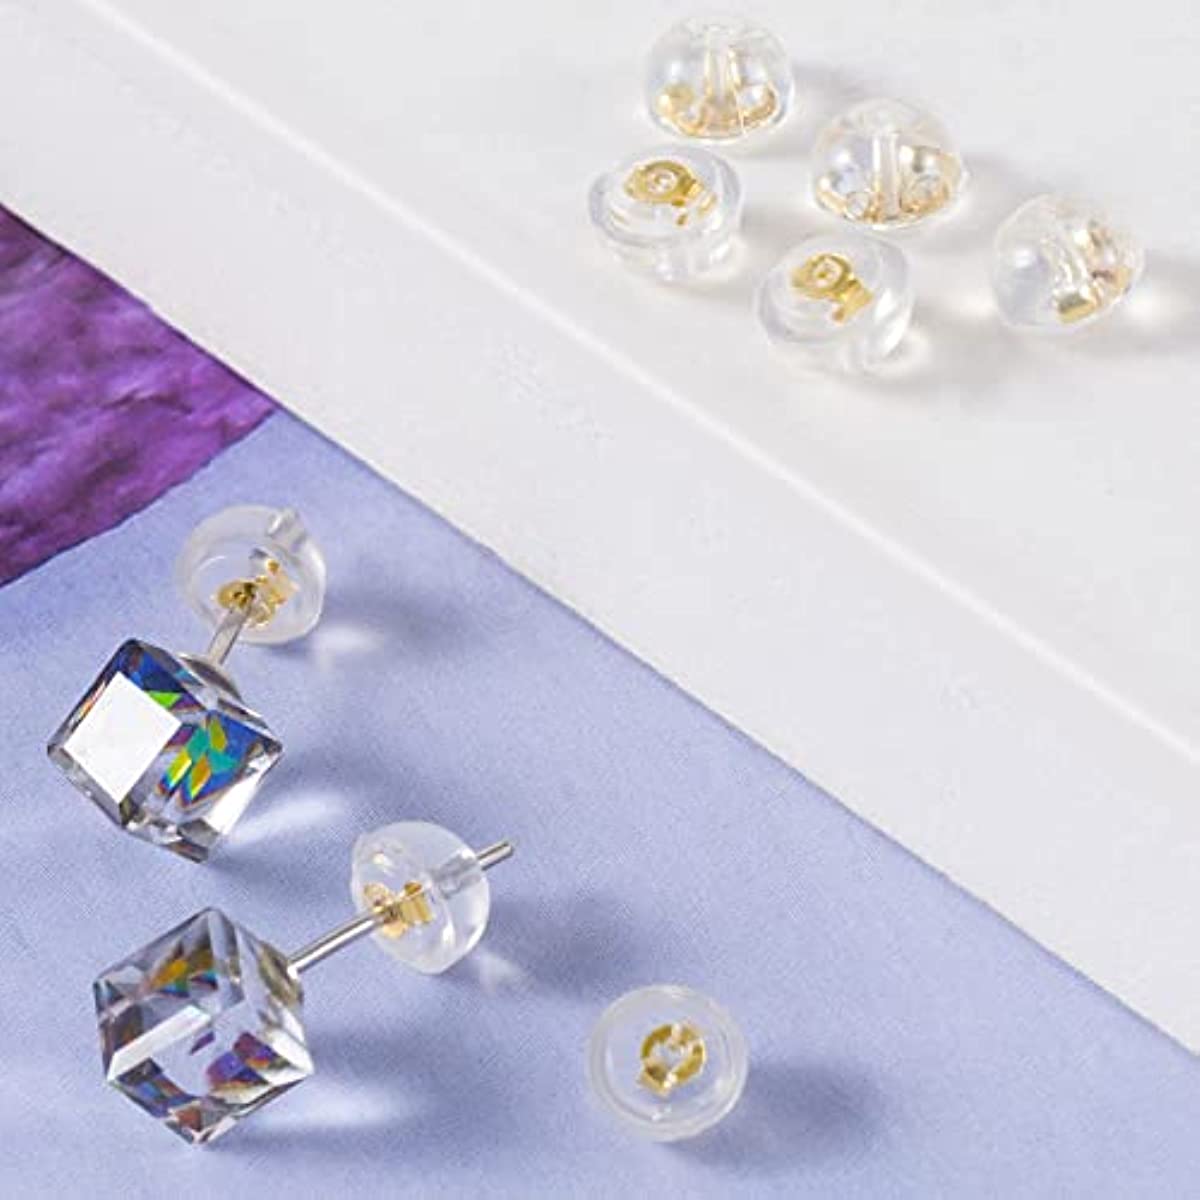  10 Pcs/5 Pairs Earring Backs for Studs, Droopy Ears and Heavy  Earring, Upgraded Heavy Earring Support Backs, Tiara Earring Backs to  Prevent Drooping, Hypoallergenic Earring Lifters (Silver + Gold)